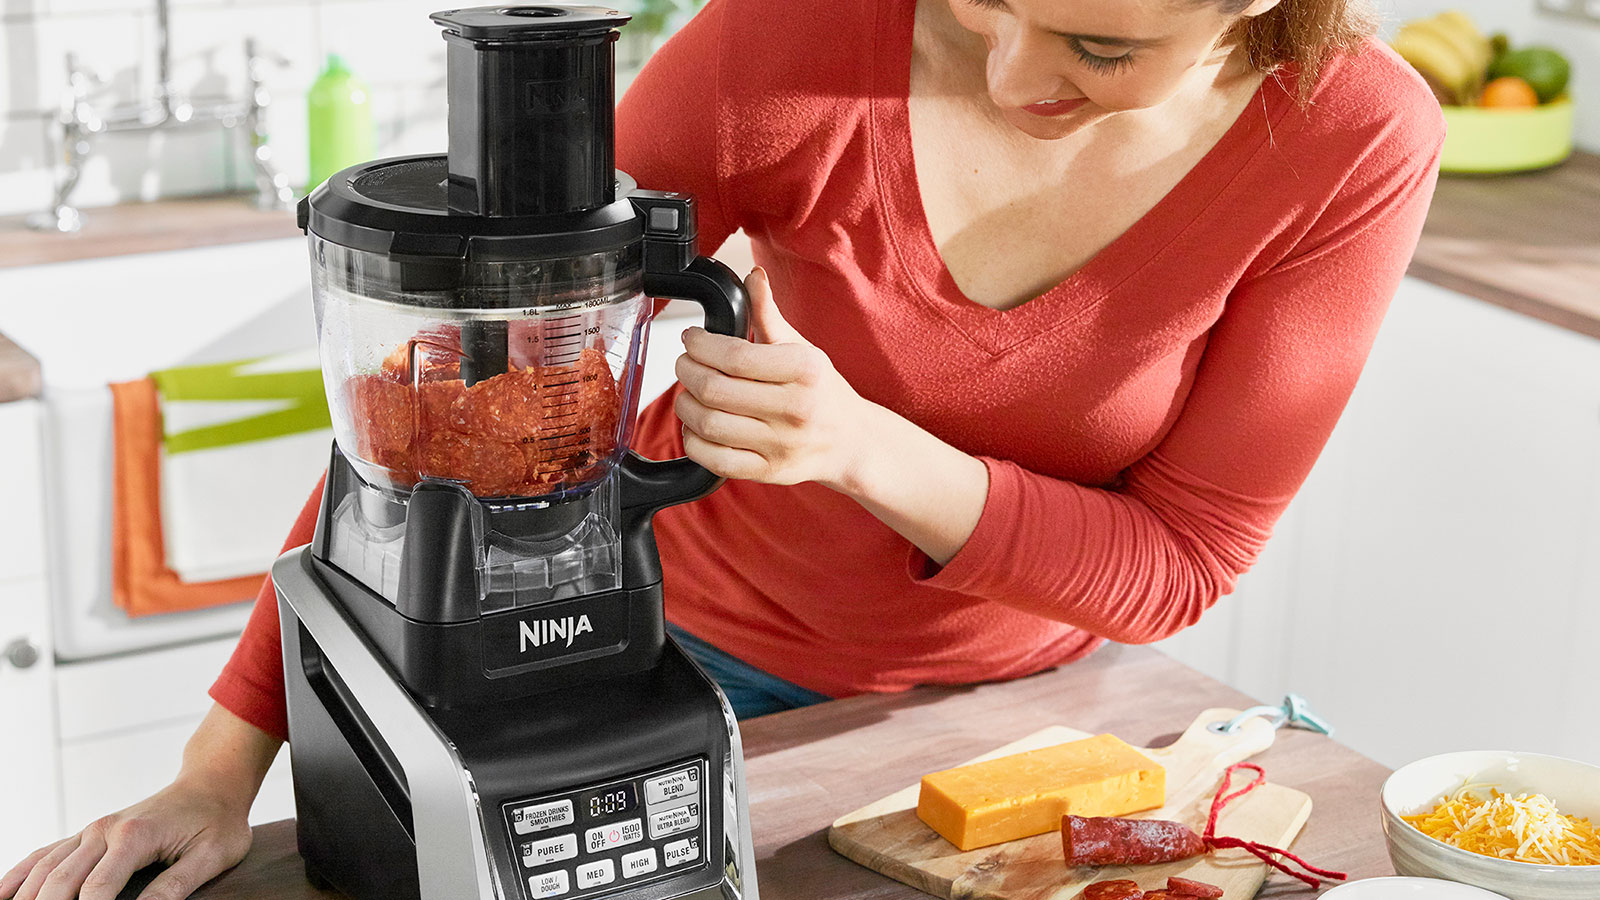 How To Chop Vegetables In A Cuisinart Food Processor 